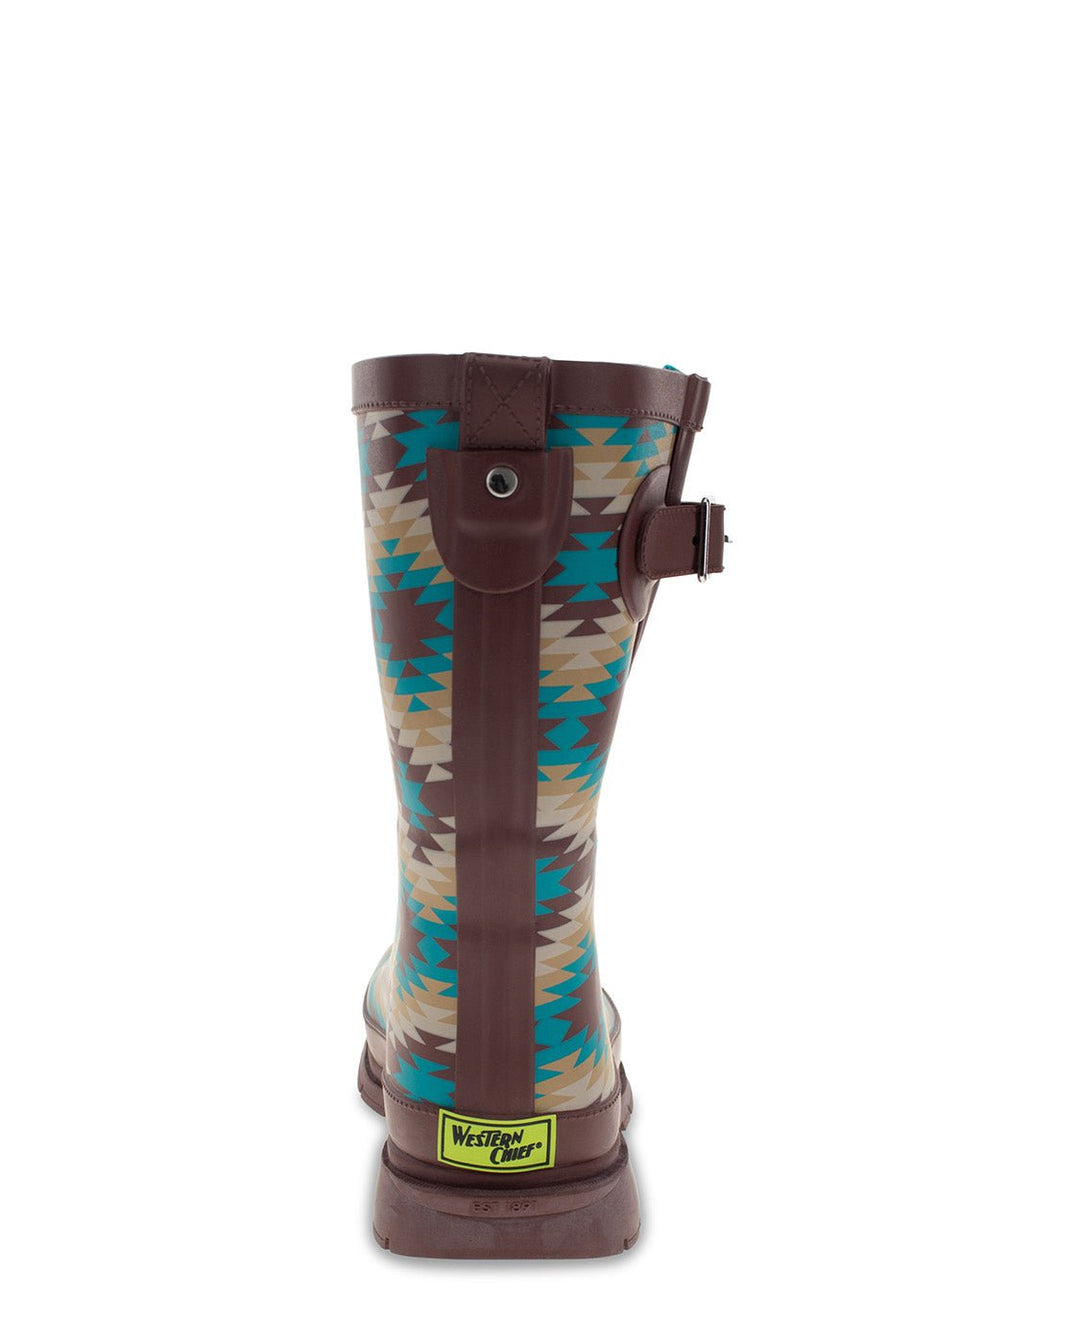 New! Women's Southwest Mid Rain Boot - Brown - Western Chief